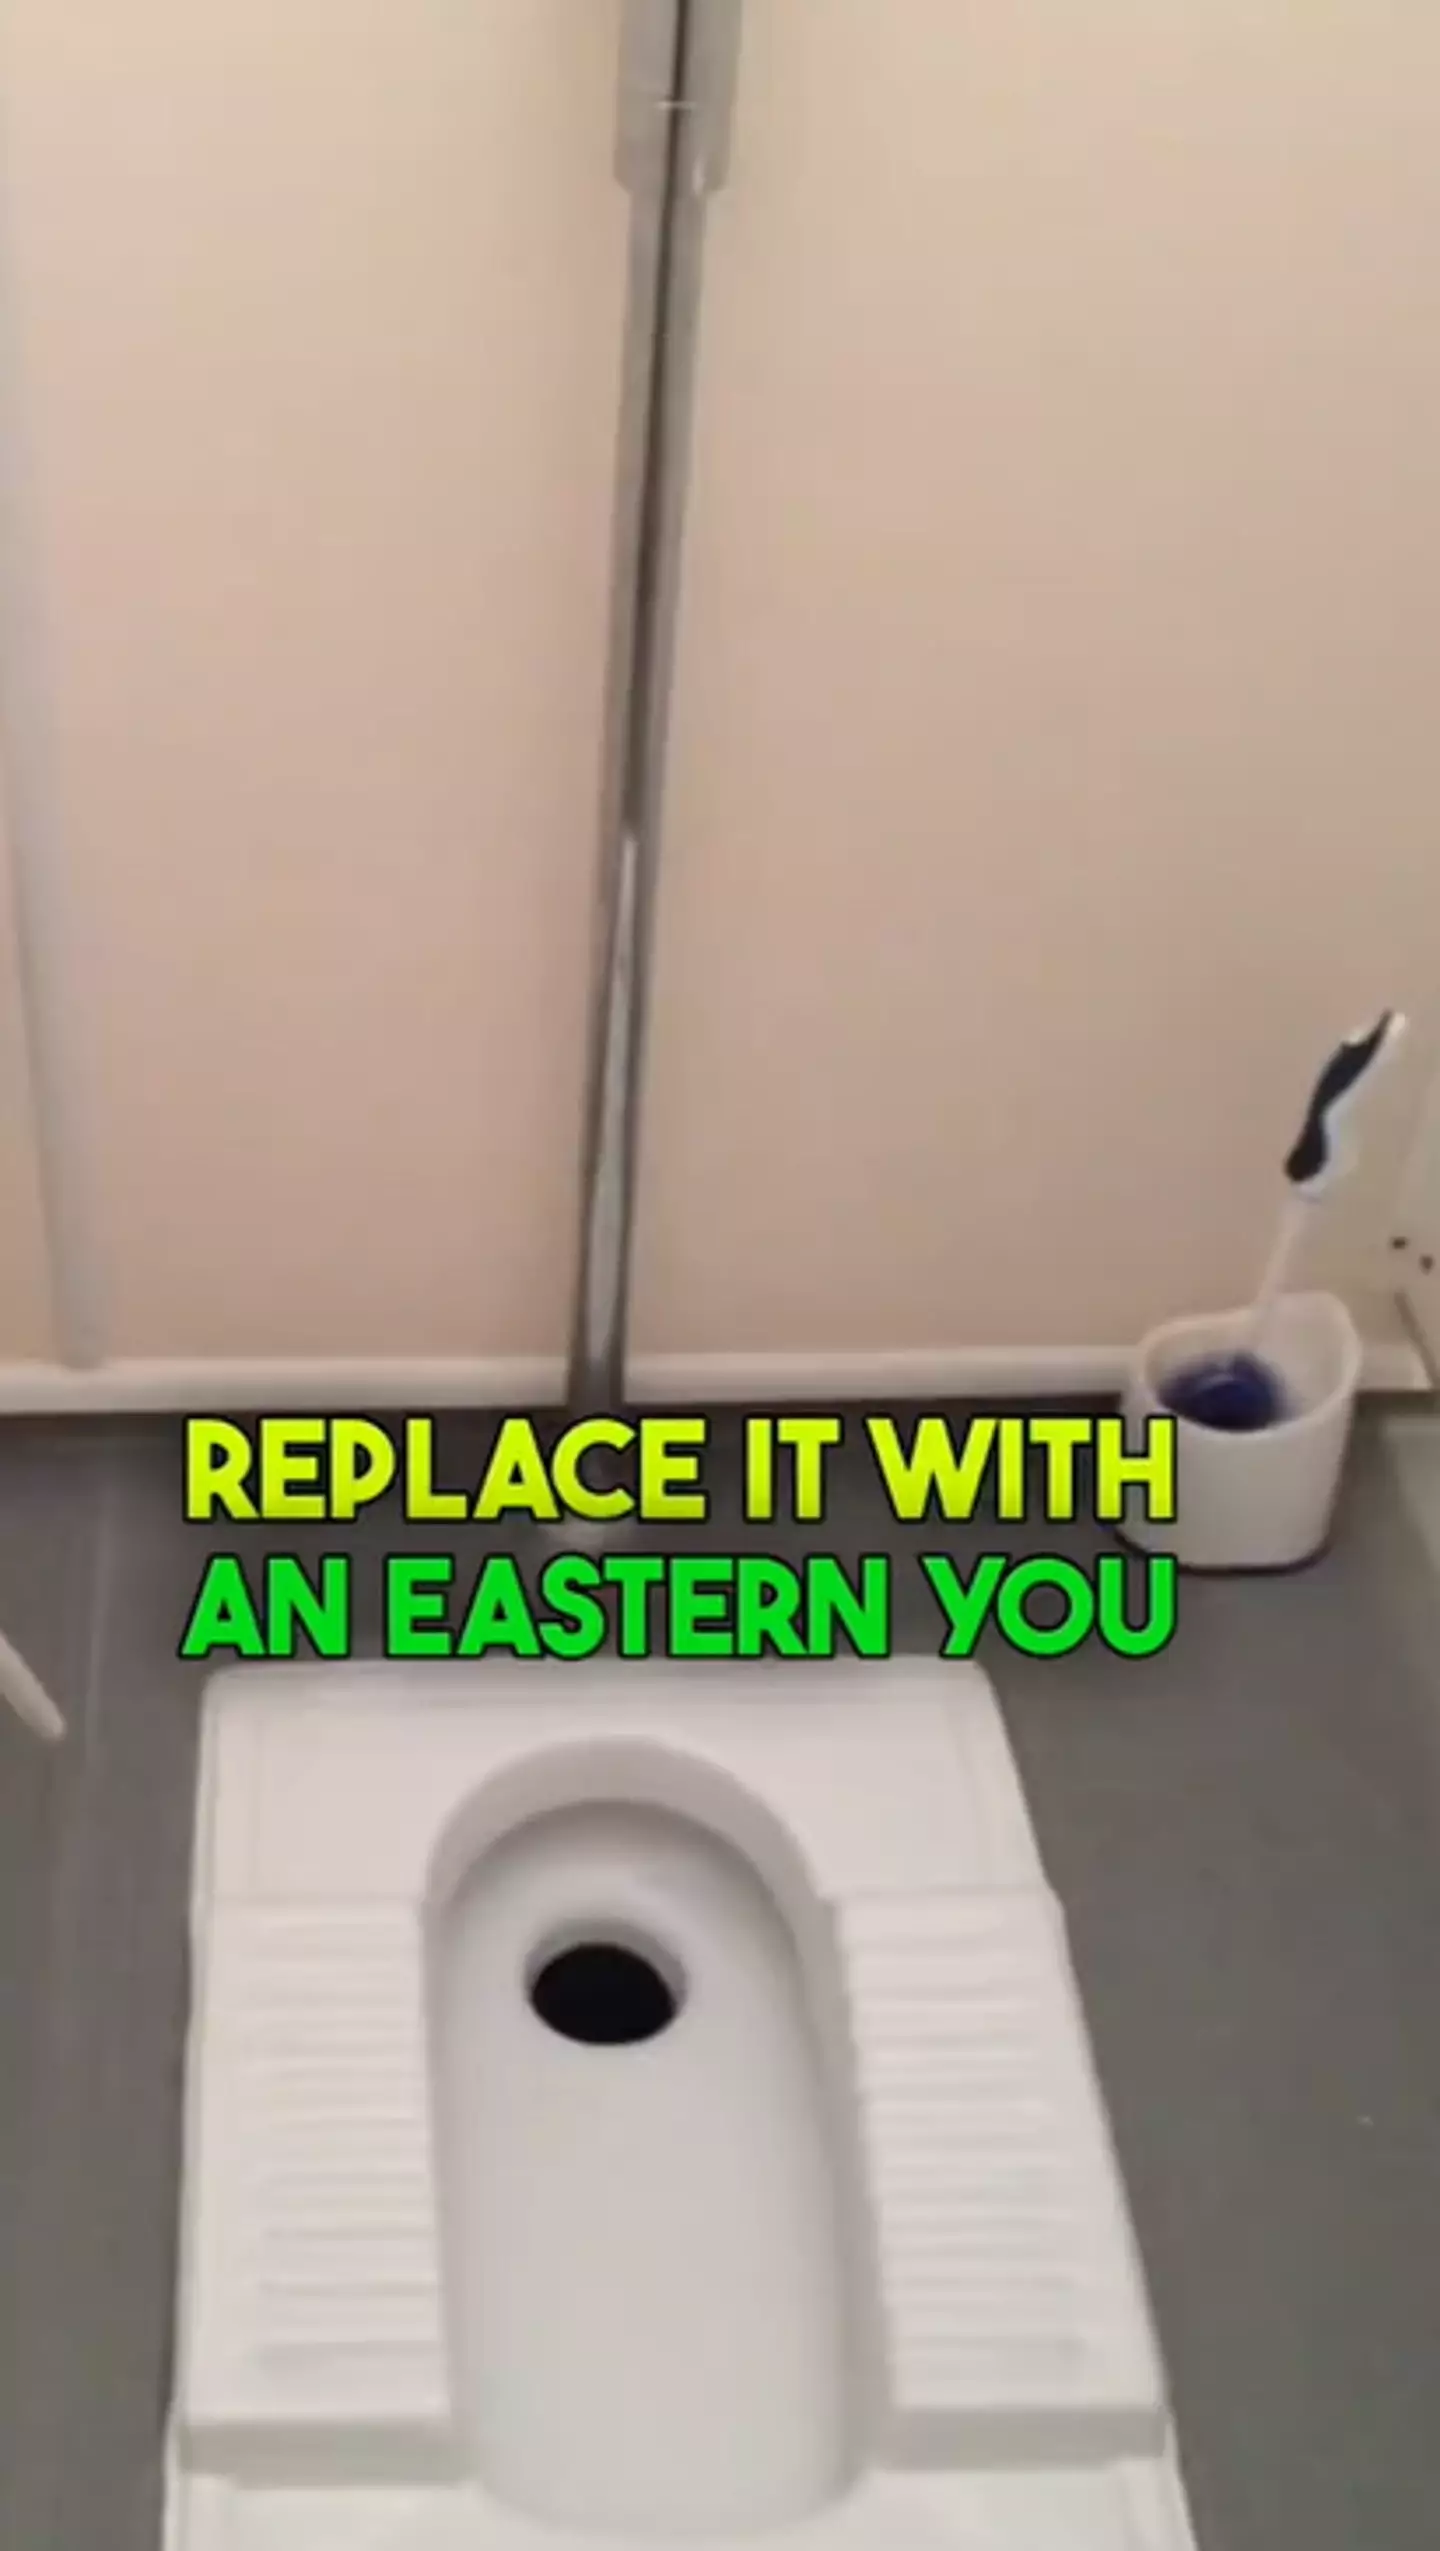 Dr Sethi shared his tips for changing your posture to mimic an Eastern toilet seat.